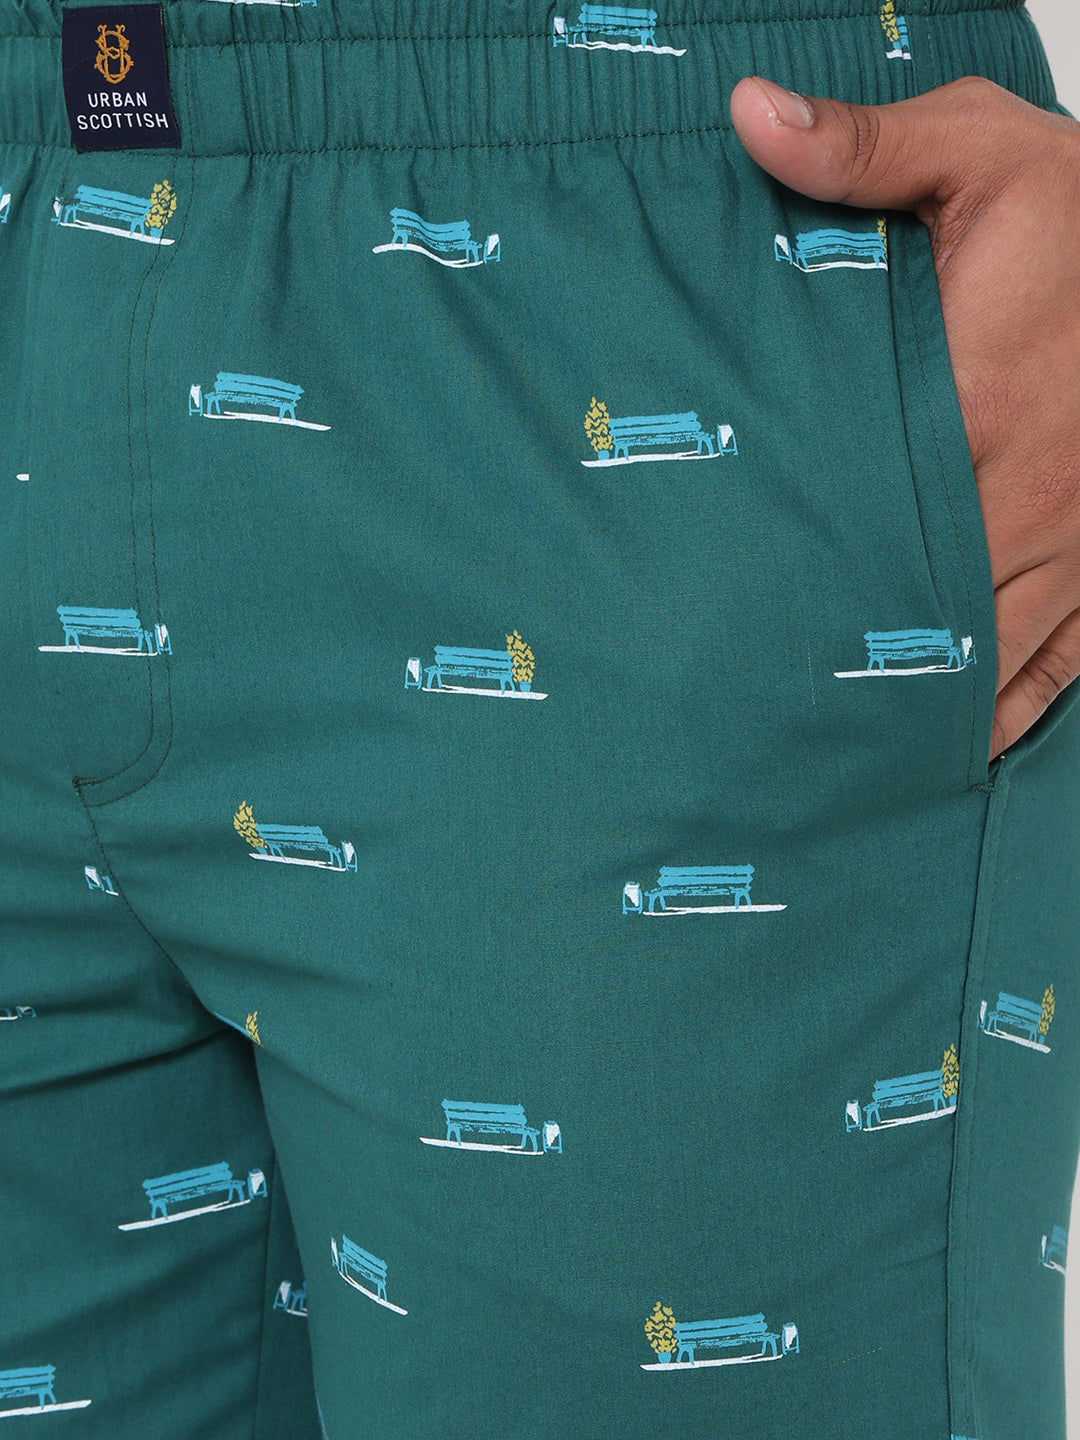 Men's Printed, Green, Cotton, Printed, Elasticated, Waistband, Pyjama  With Side Pockets